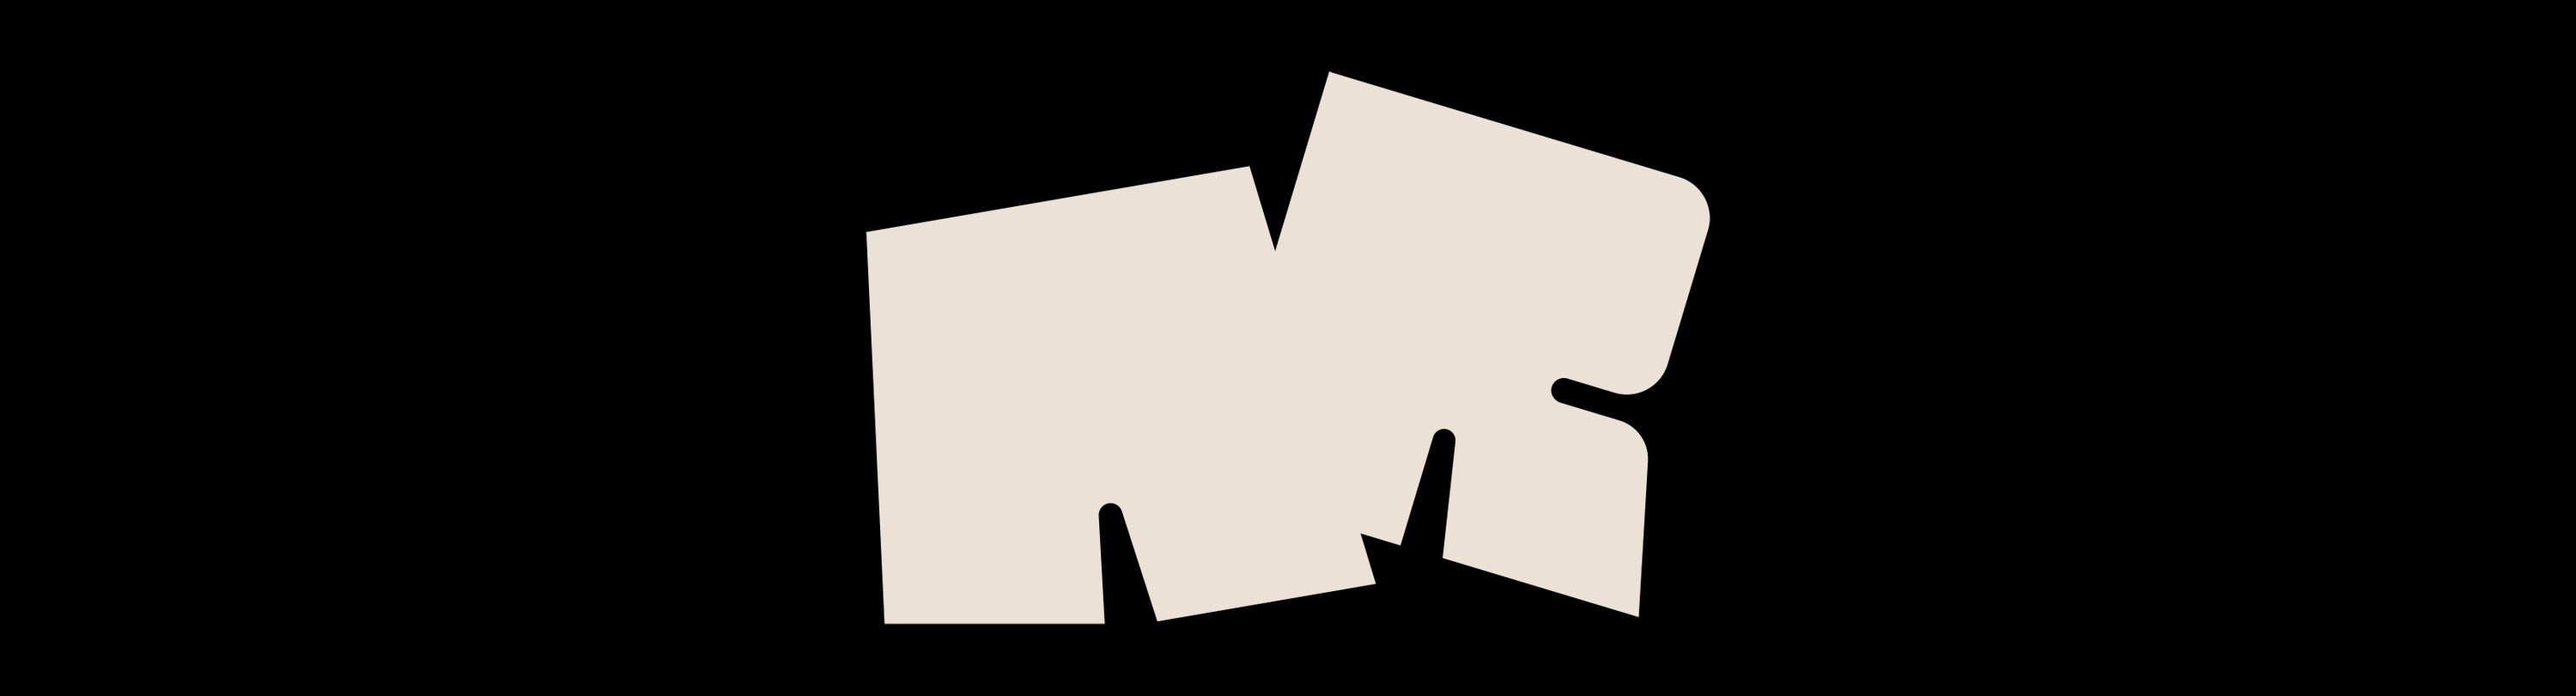 The letter A and R in a beige colour at at an odd angle on a black background